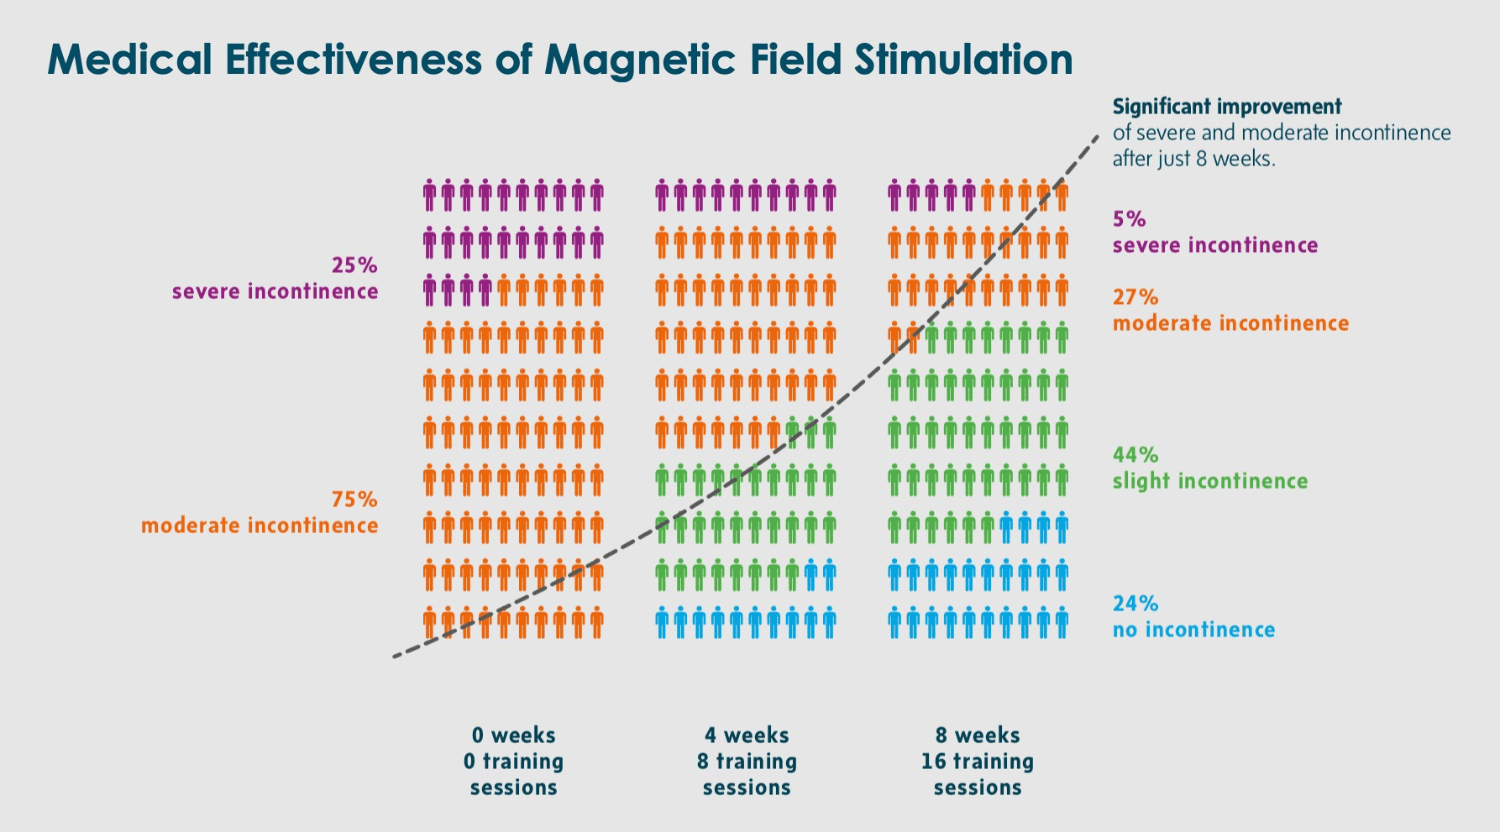 Medical Effectiveness of Magnetic Field Stimulation